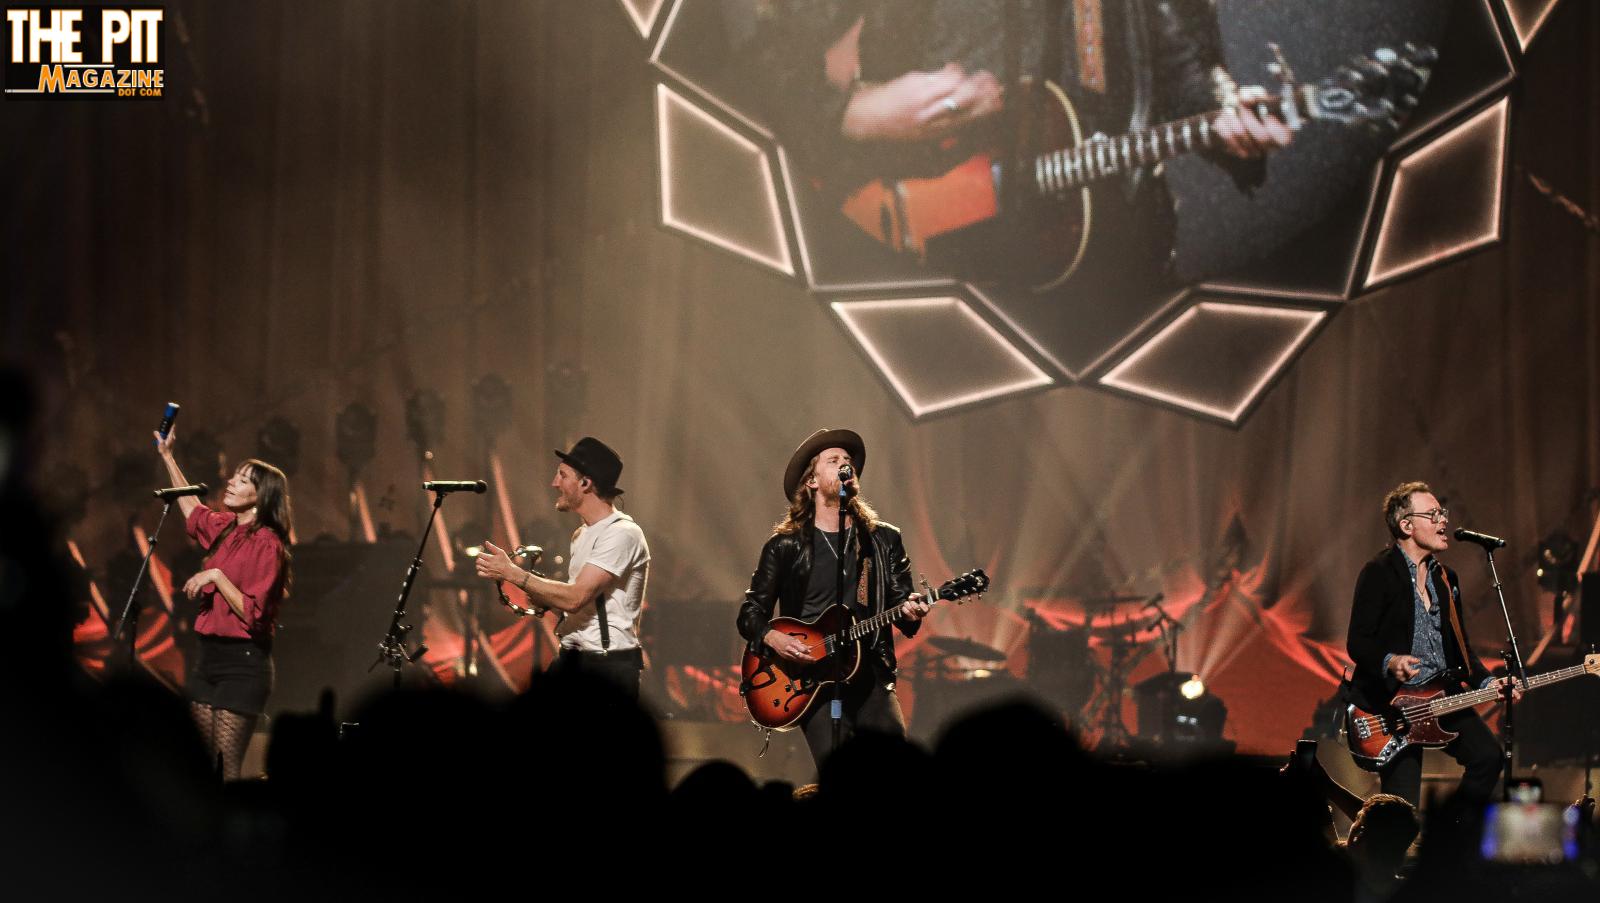 The Lumineers perform on stage, with the lead singer playing guitar and three other members with microphones and instruments, in front of a geometric backdrop.